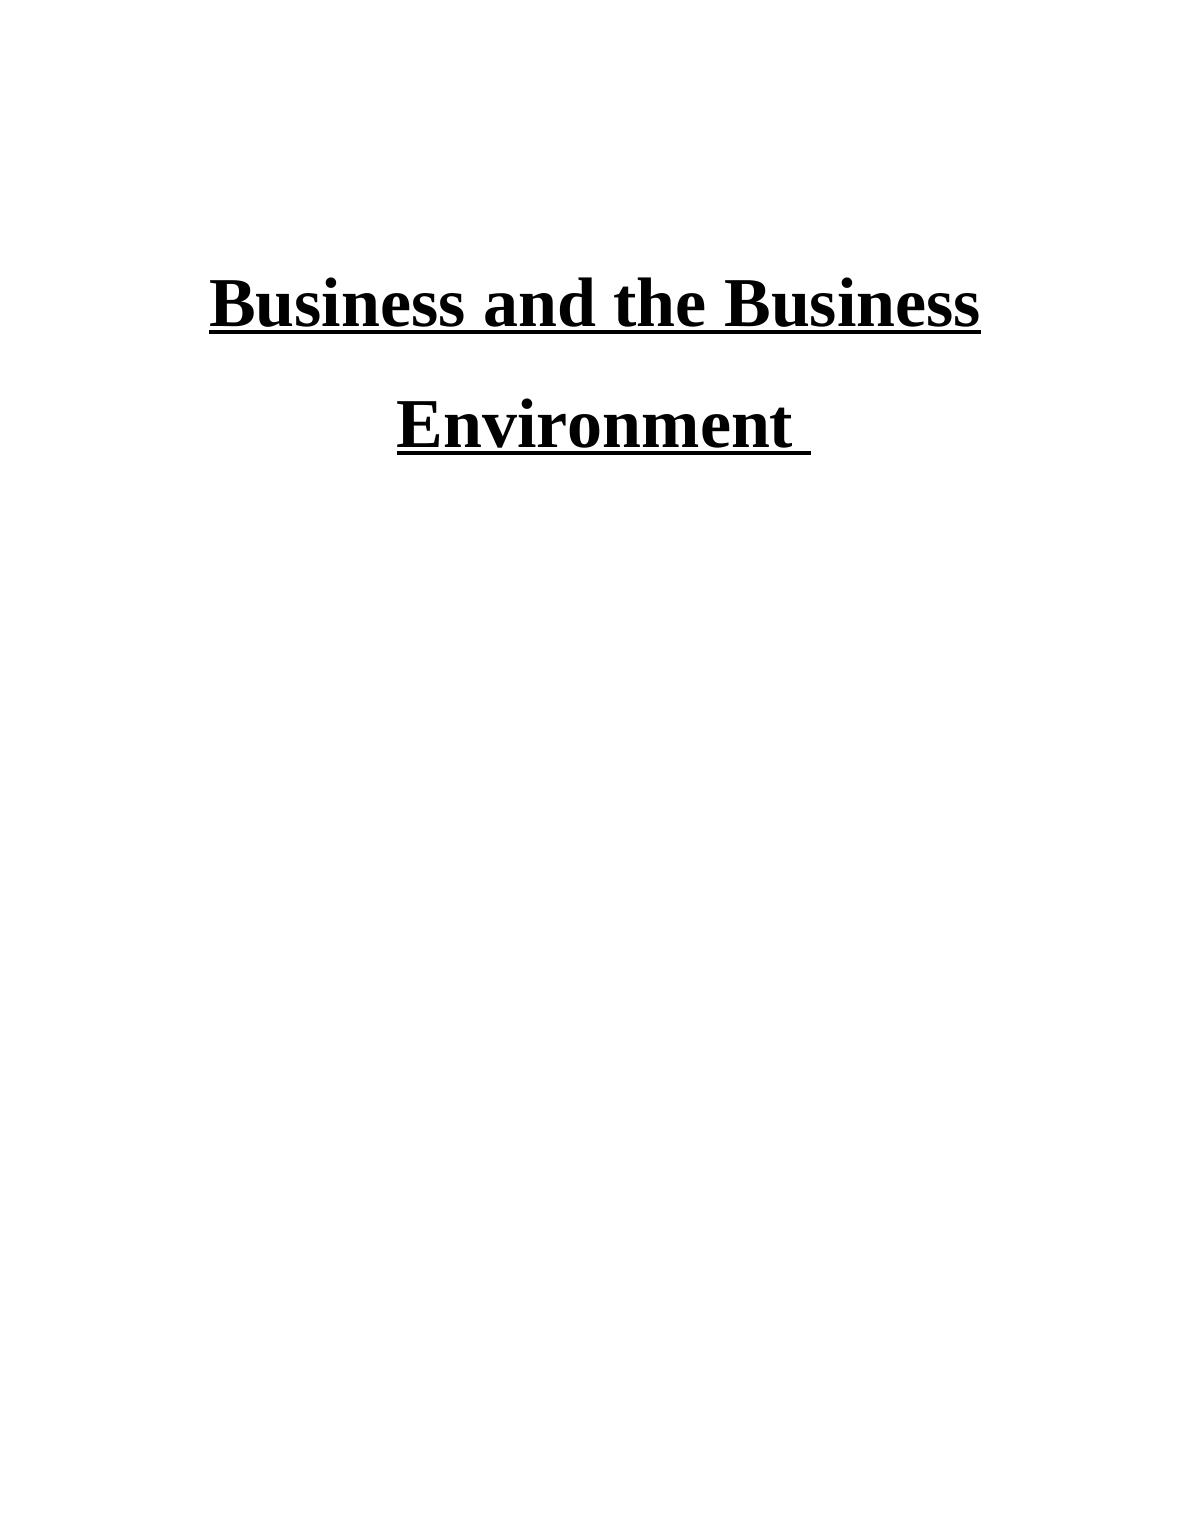 Business and the Business Environment   Assignment Sample_1